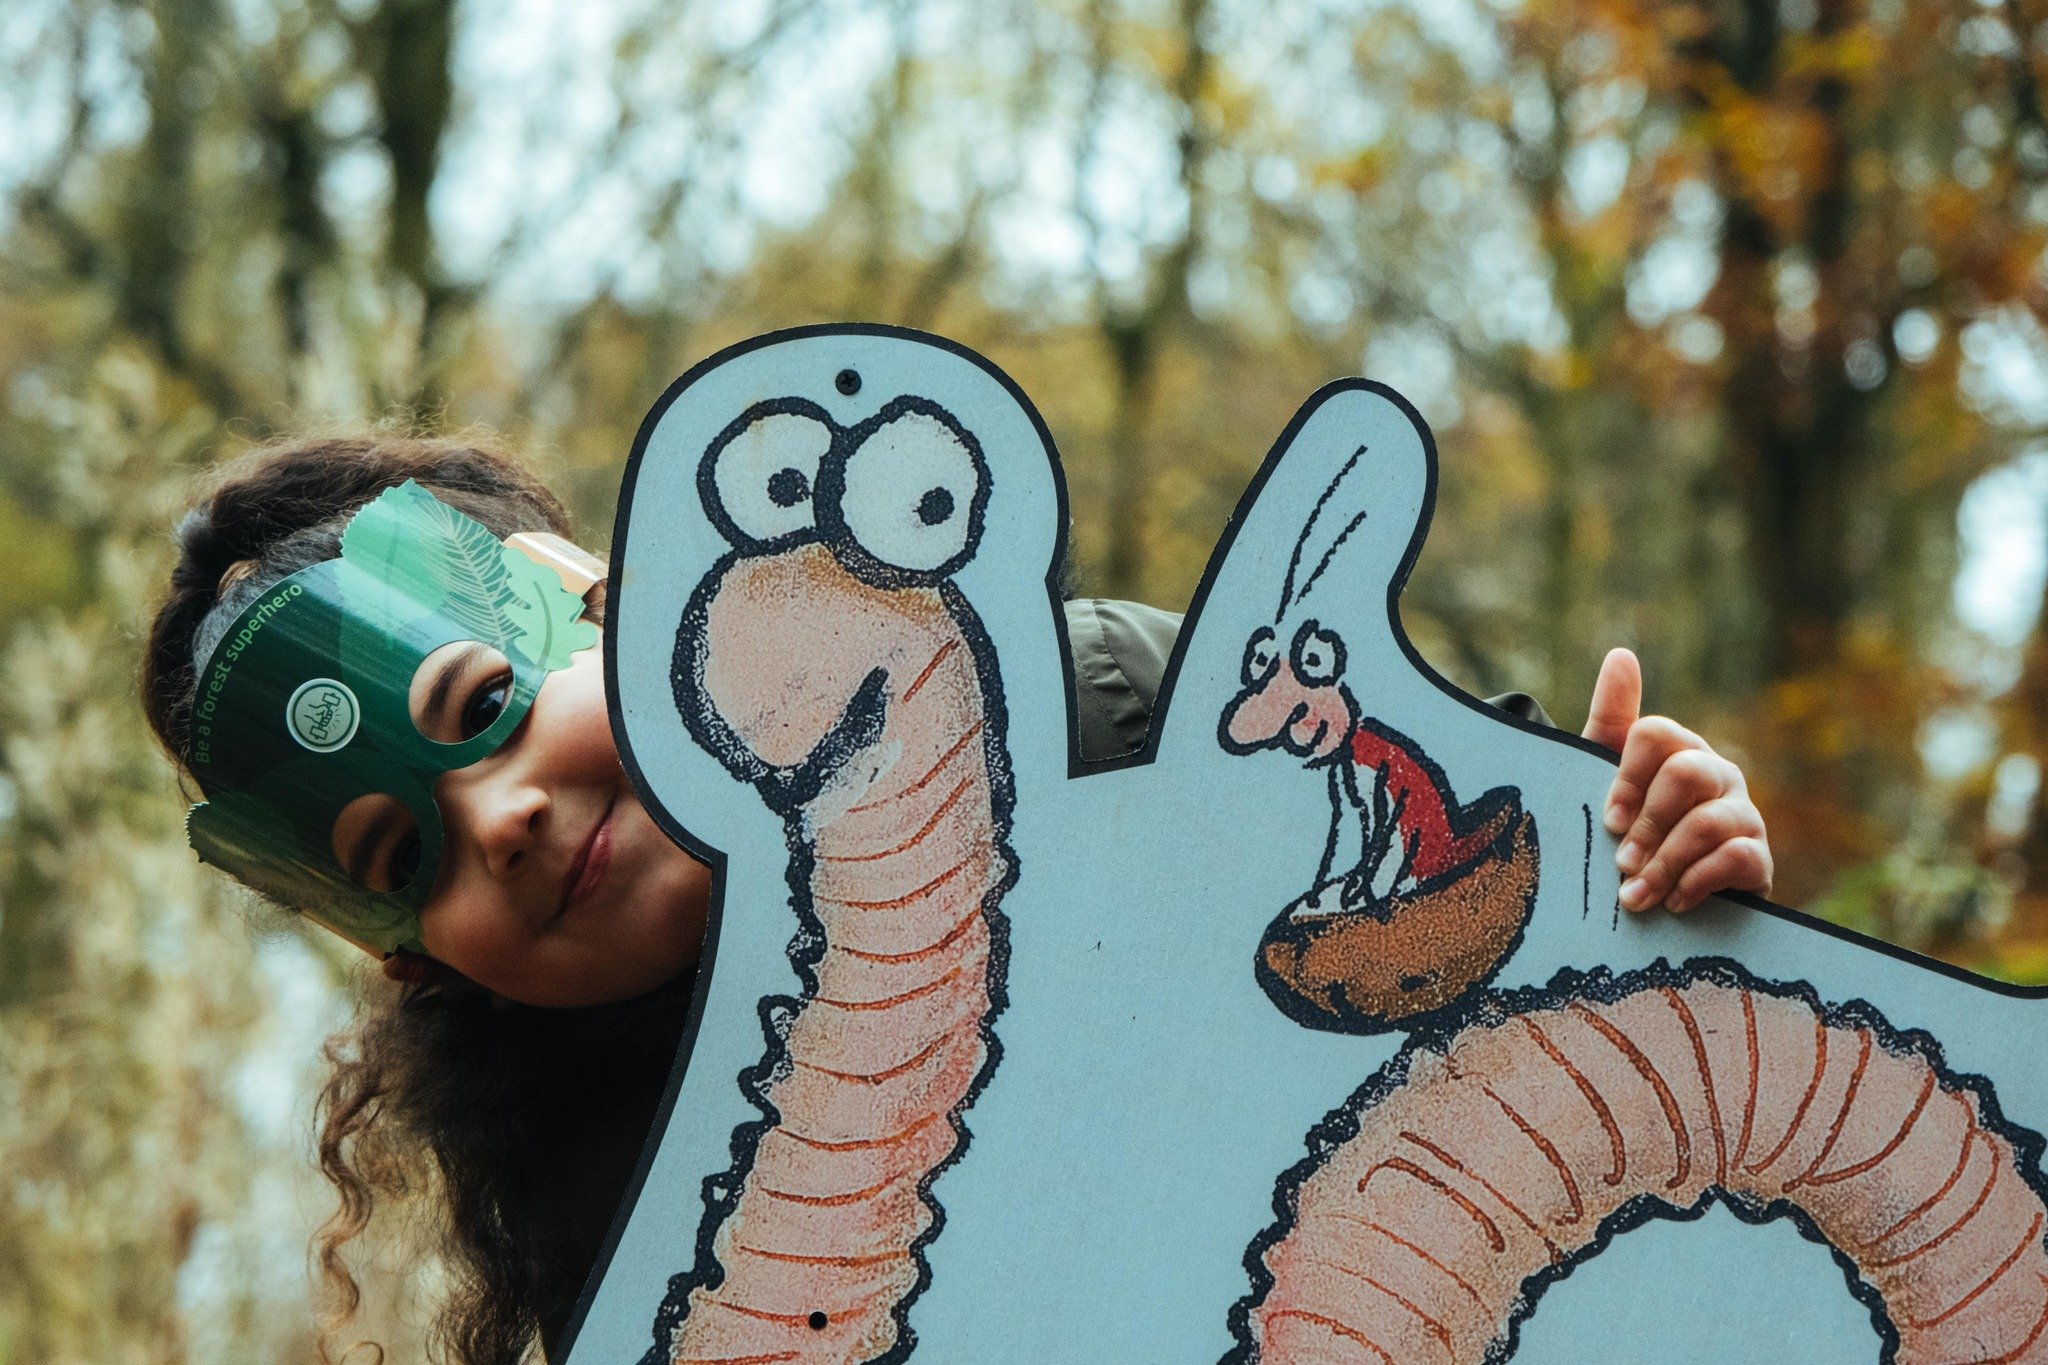 Superworm trail comes to Salcey Forest